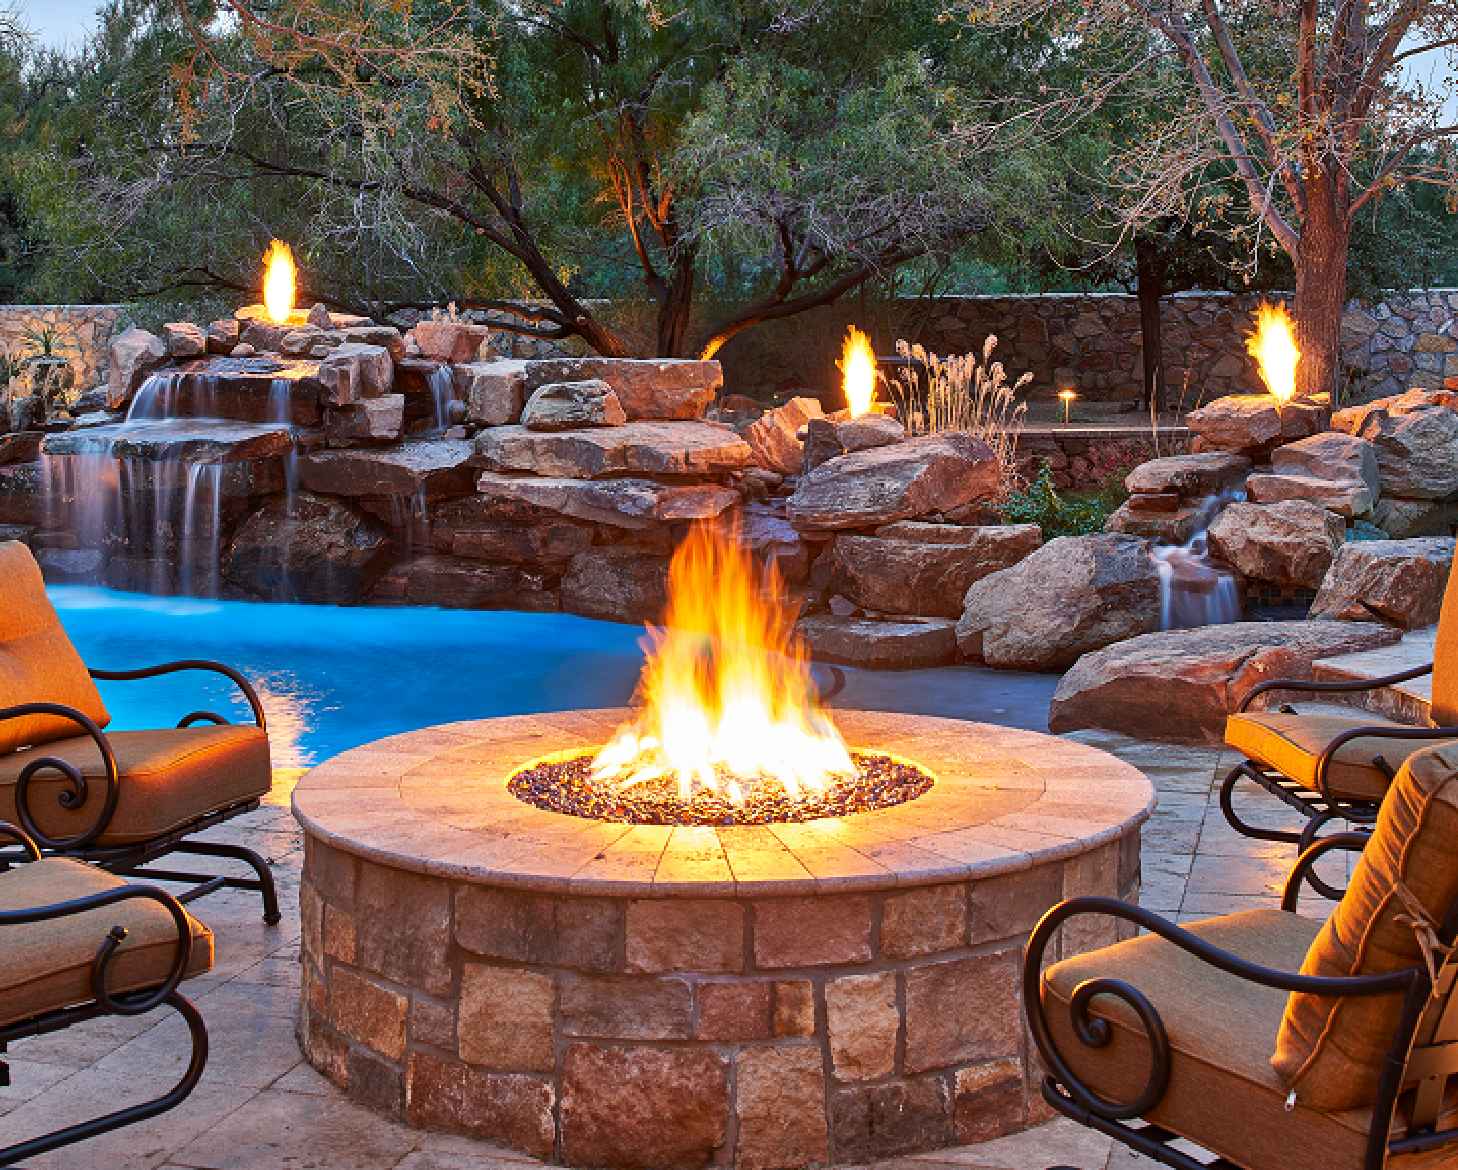 For Back Yard Heating, Patio Heaters or Fire Pits?